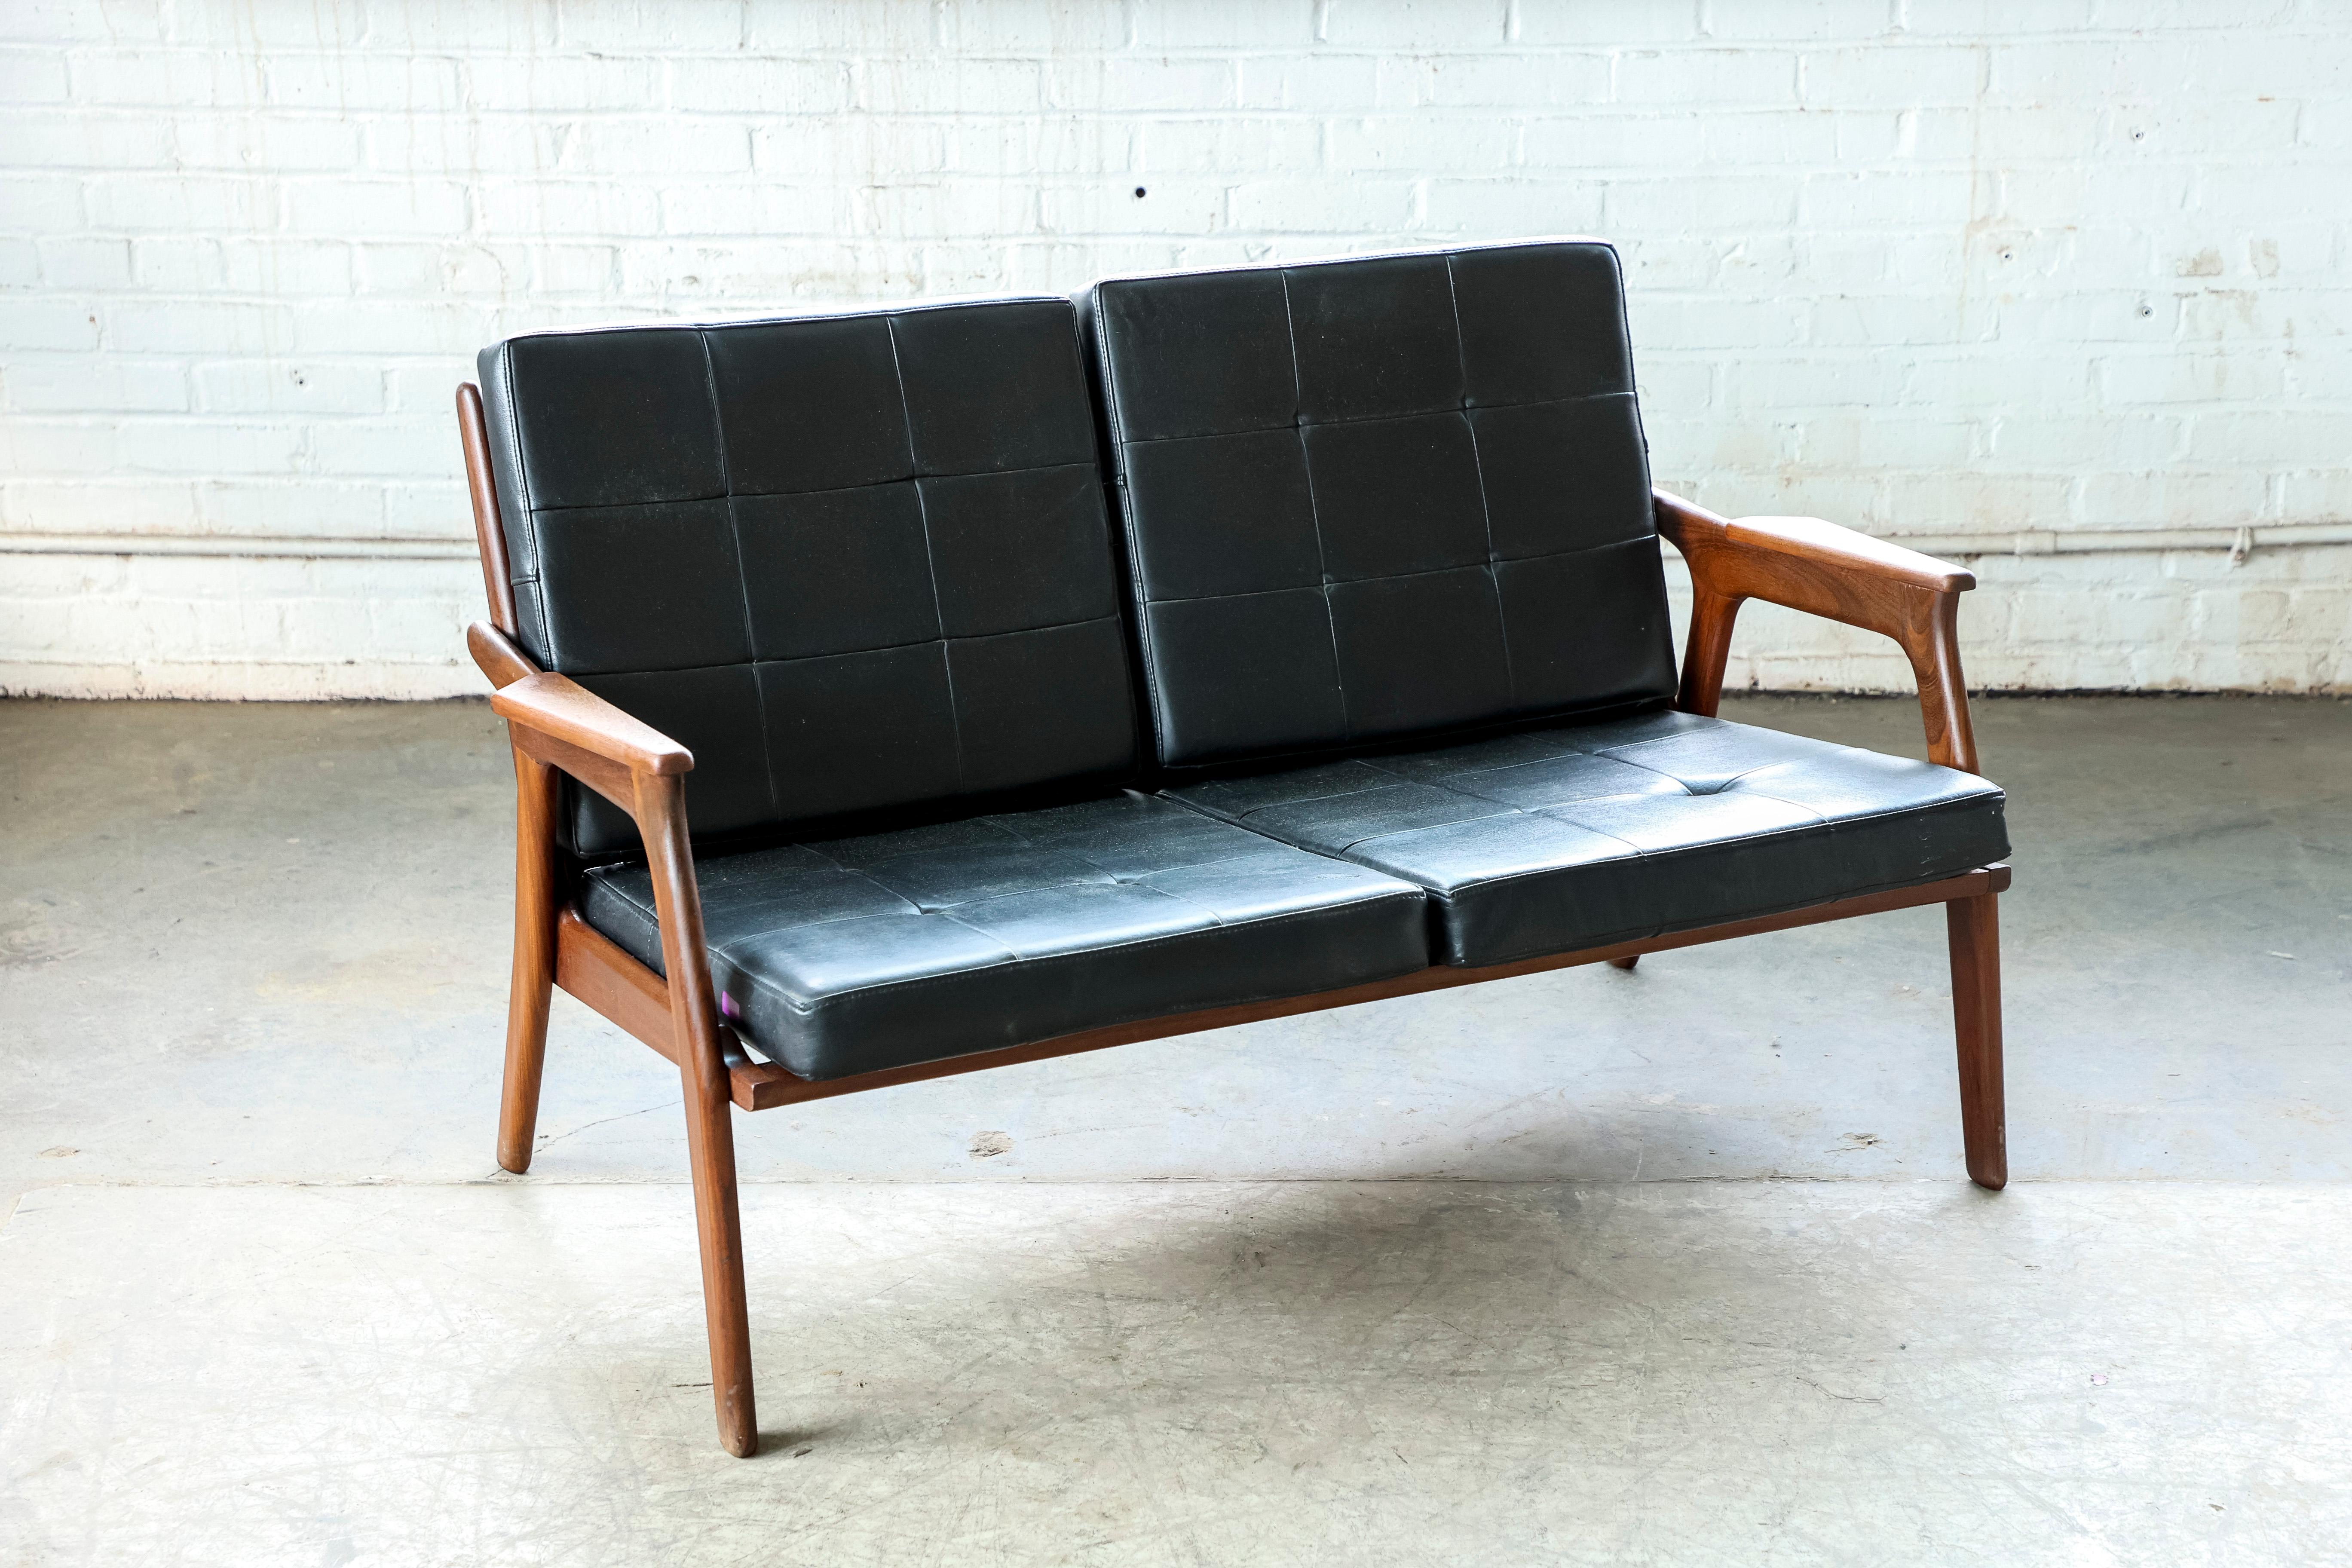 Beautiful and elegant small 1950s easy style Danish settee with the frame, legs and armrests in solid teak. Very high design quality and workmanship. The piece is unmarked but the design is almost identical to settees made by Tove and Edvard Kindt